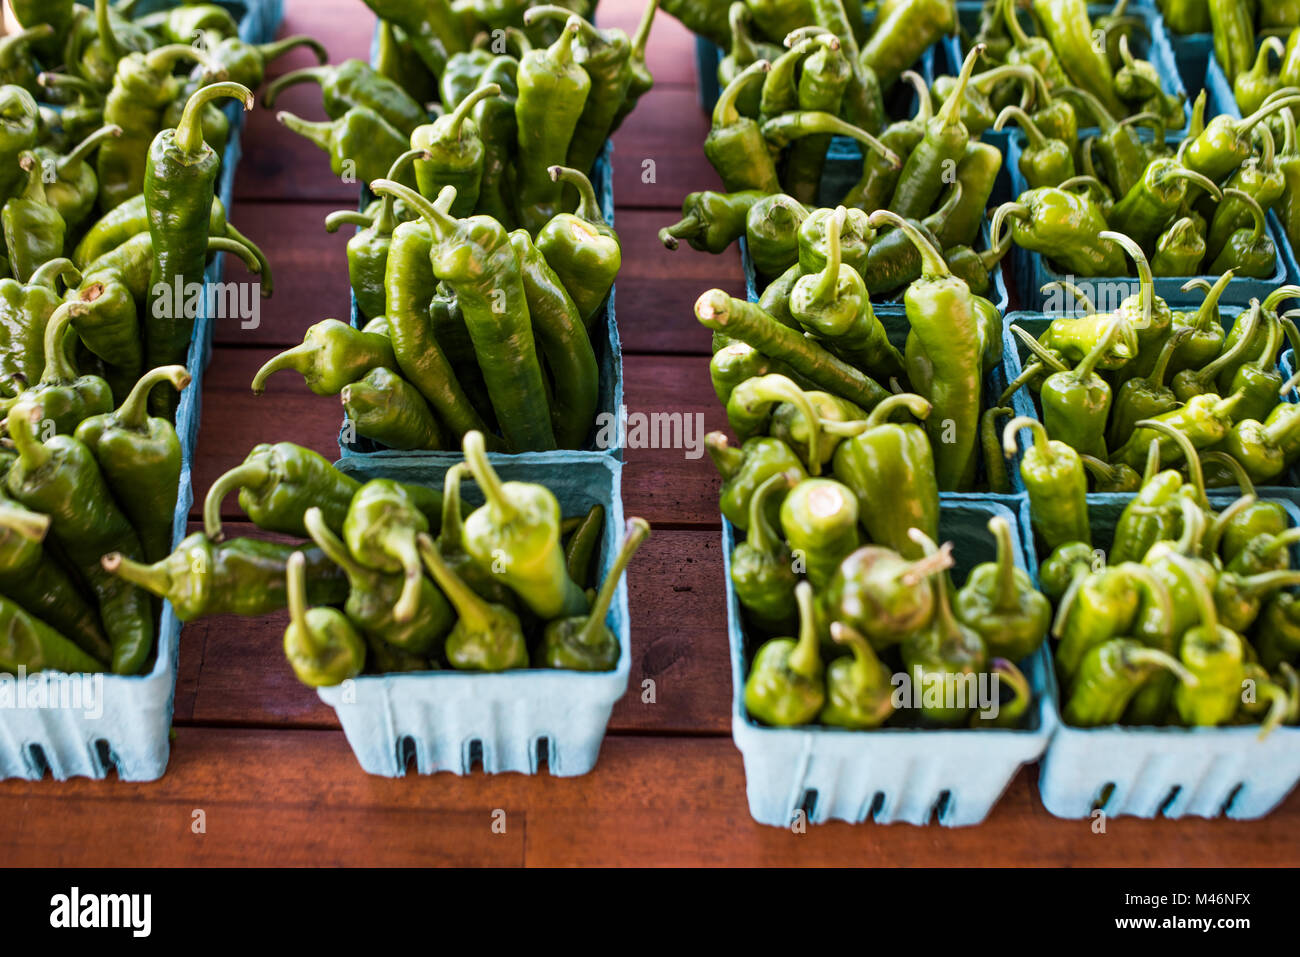 Cartons of Farm Fresh Shishito Peppers at Farm Stand. Stock Photo